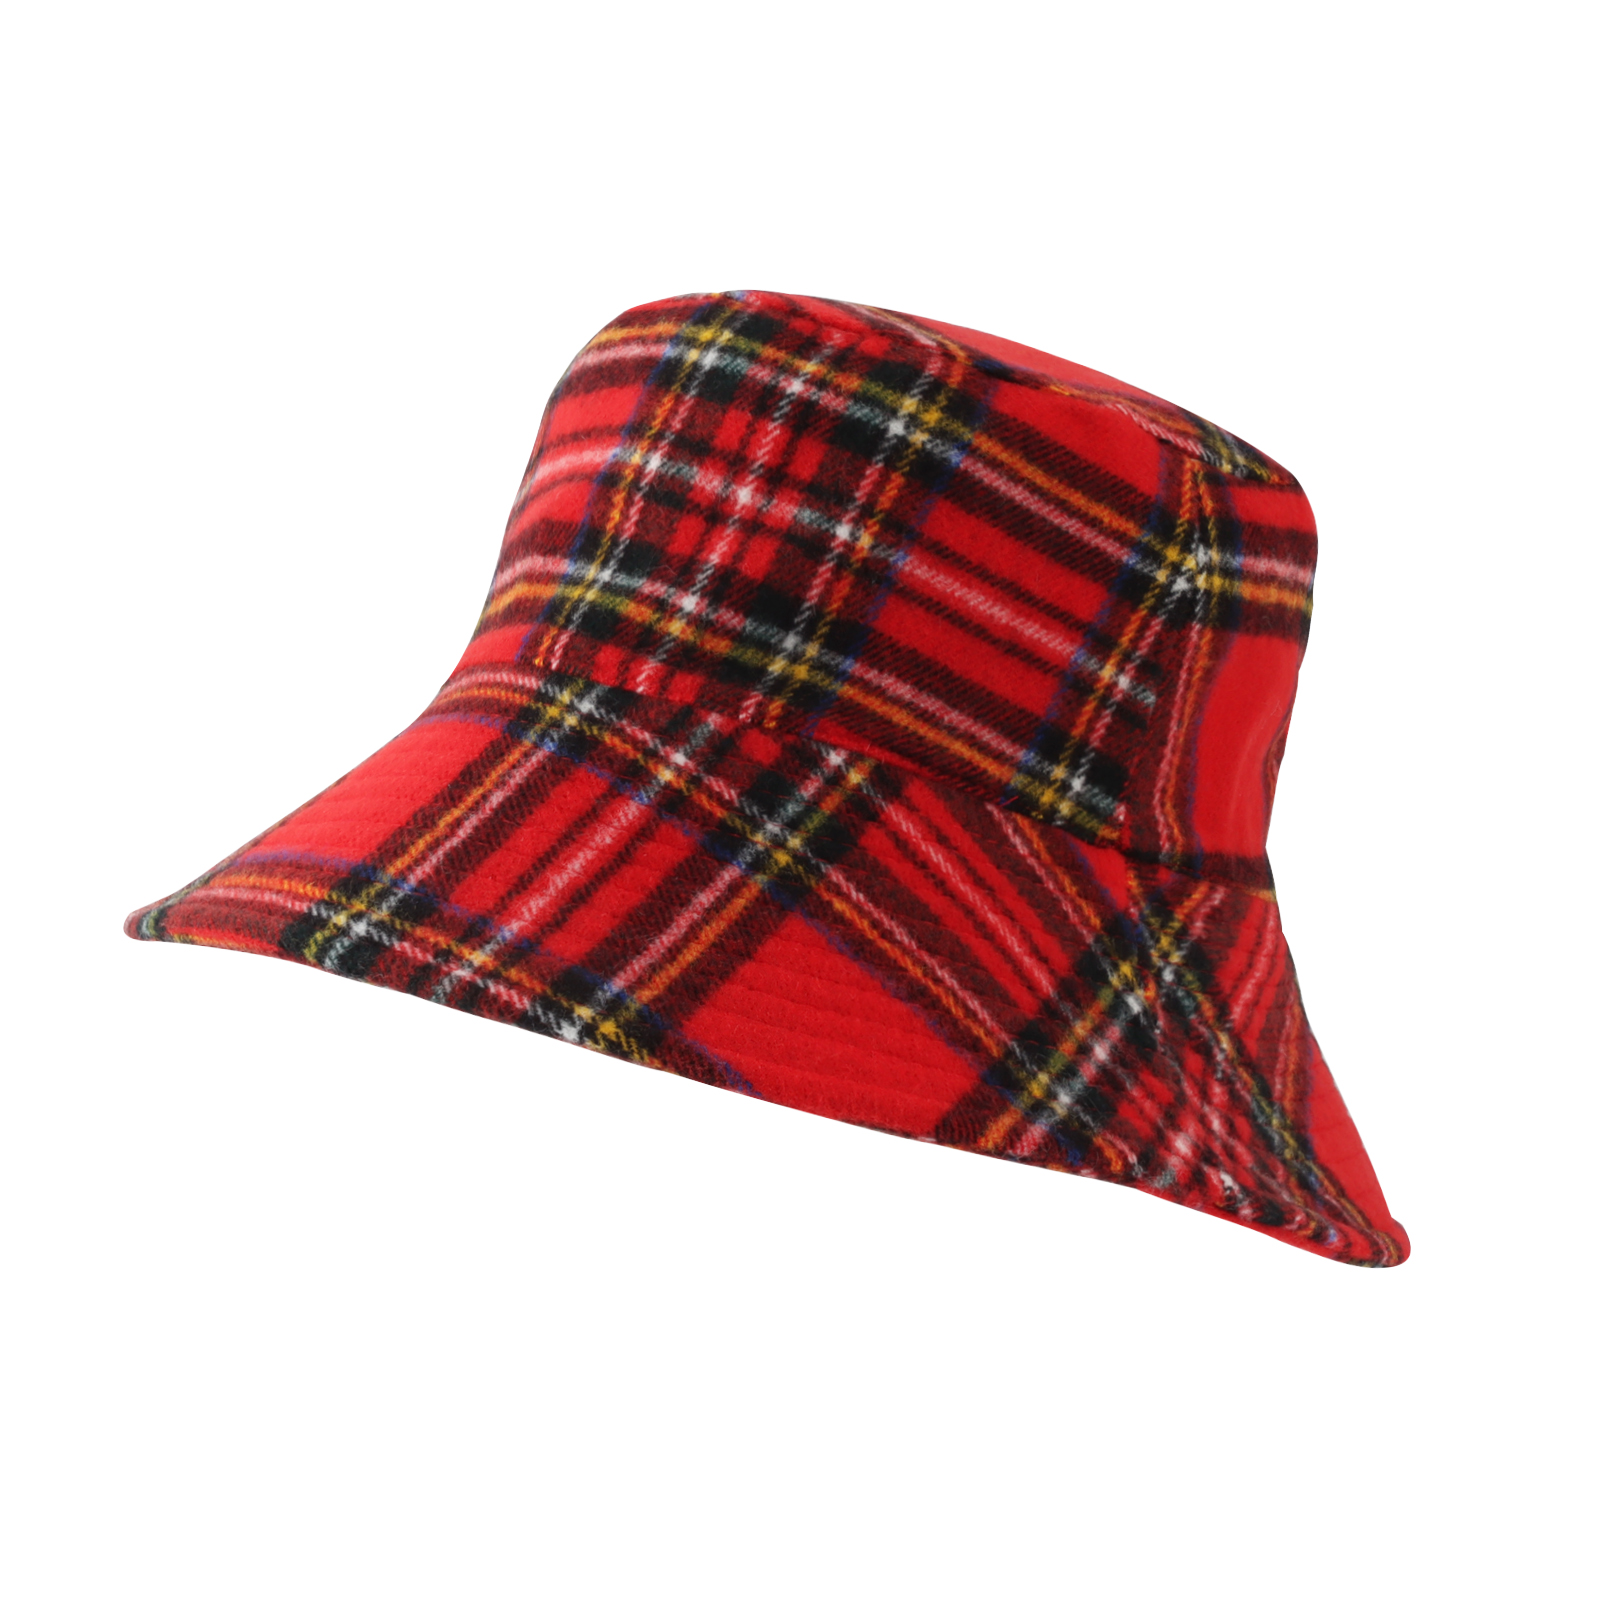 WITHMOONS Polyester Plaid Tartan Bucket Fedora Hat Winter Check Cap HMB1299 (Red) - image 2 of 5